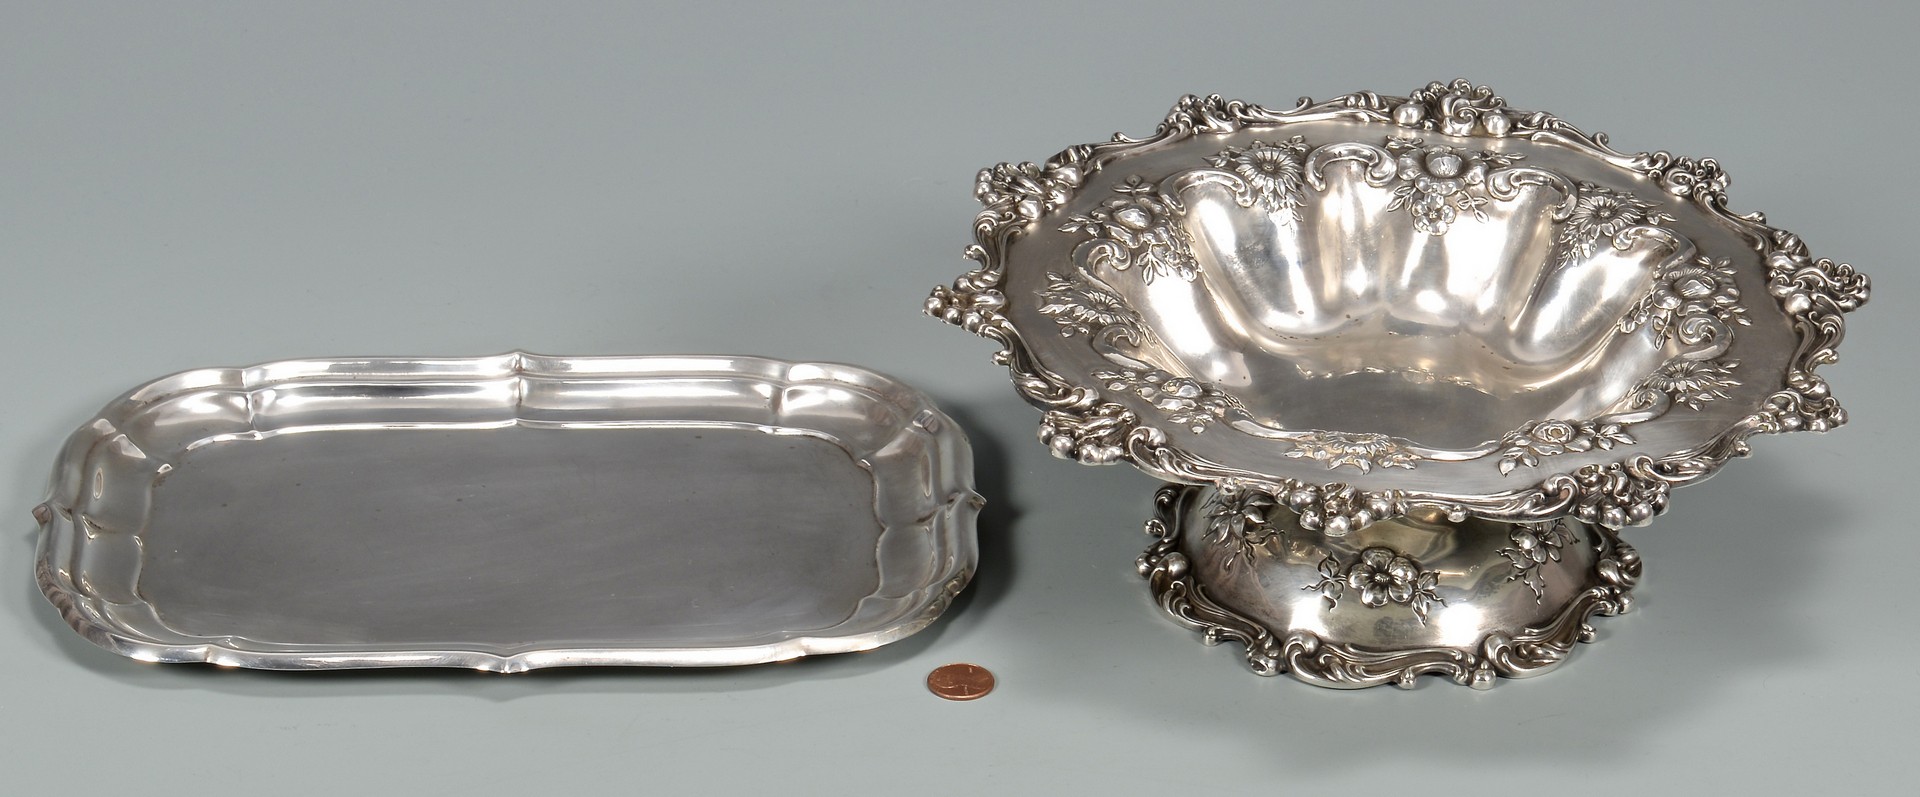 Lot 888: Sterling Compote and Tray